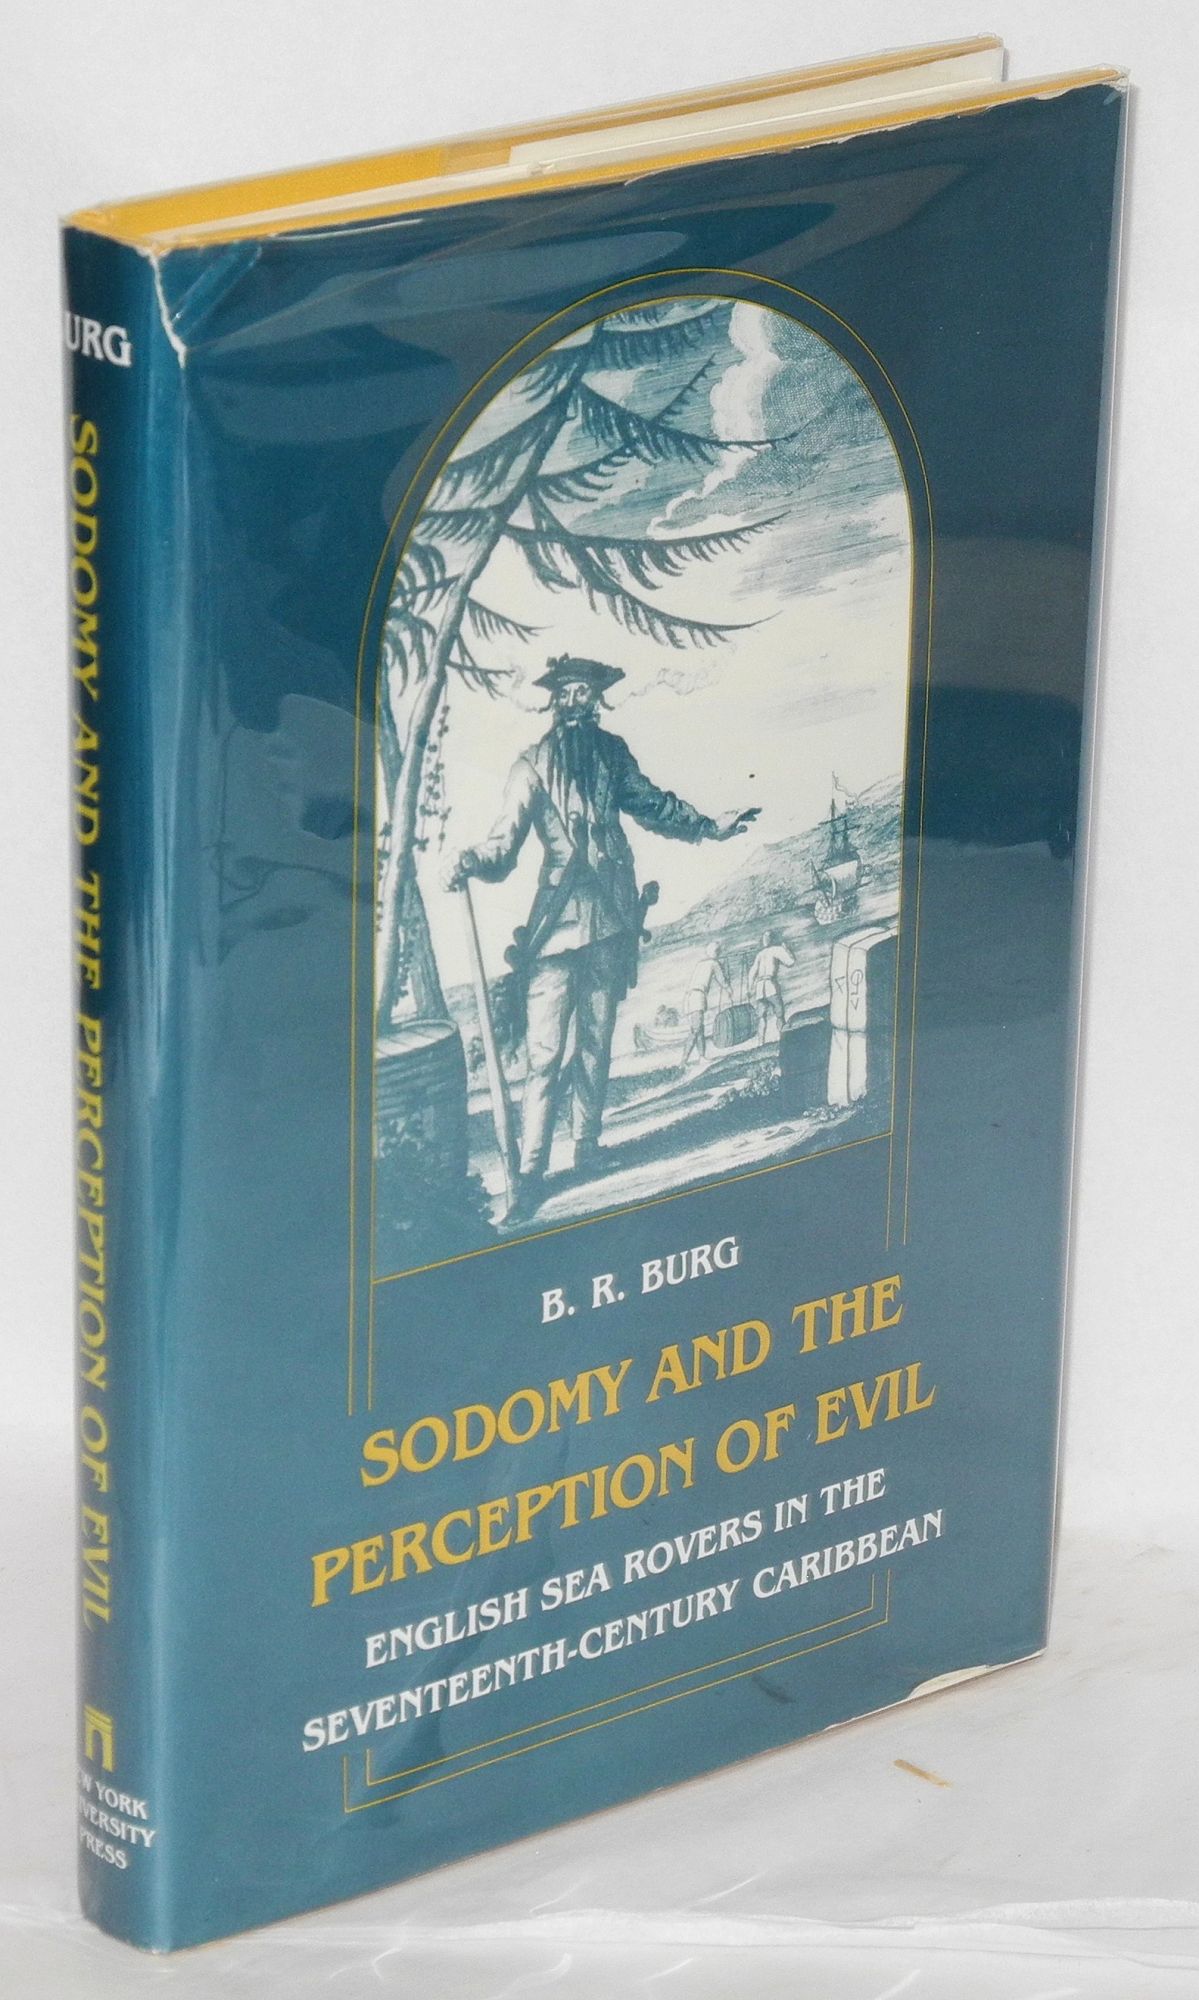 Sodomy and the Perception of Evil: English sea rovers in the seventeenth-century Caribbean - Burg, B. R.